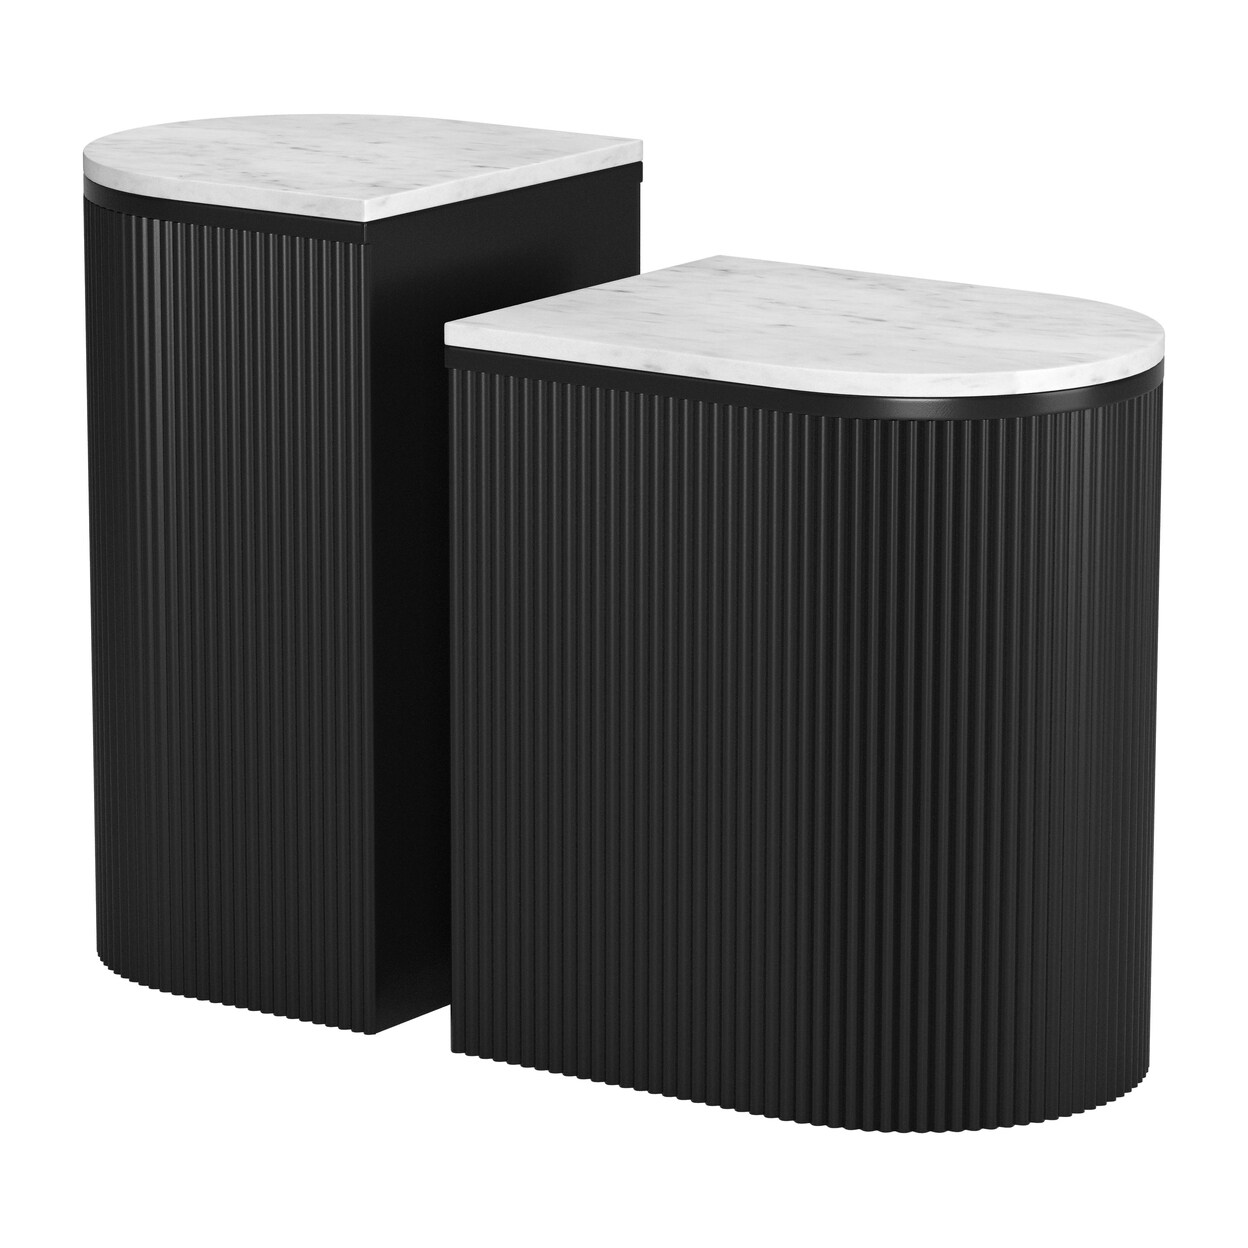 Zuo Modern Contemporary Inc. Ormara Side Table Set (2-Piece) White and Black